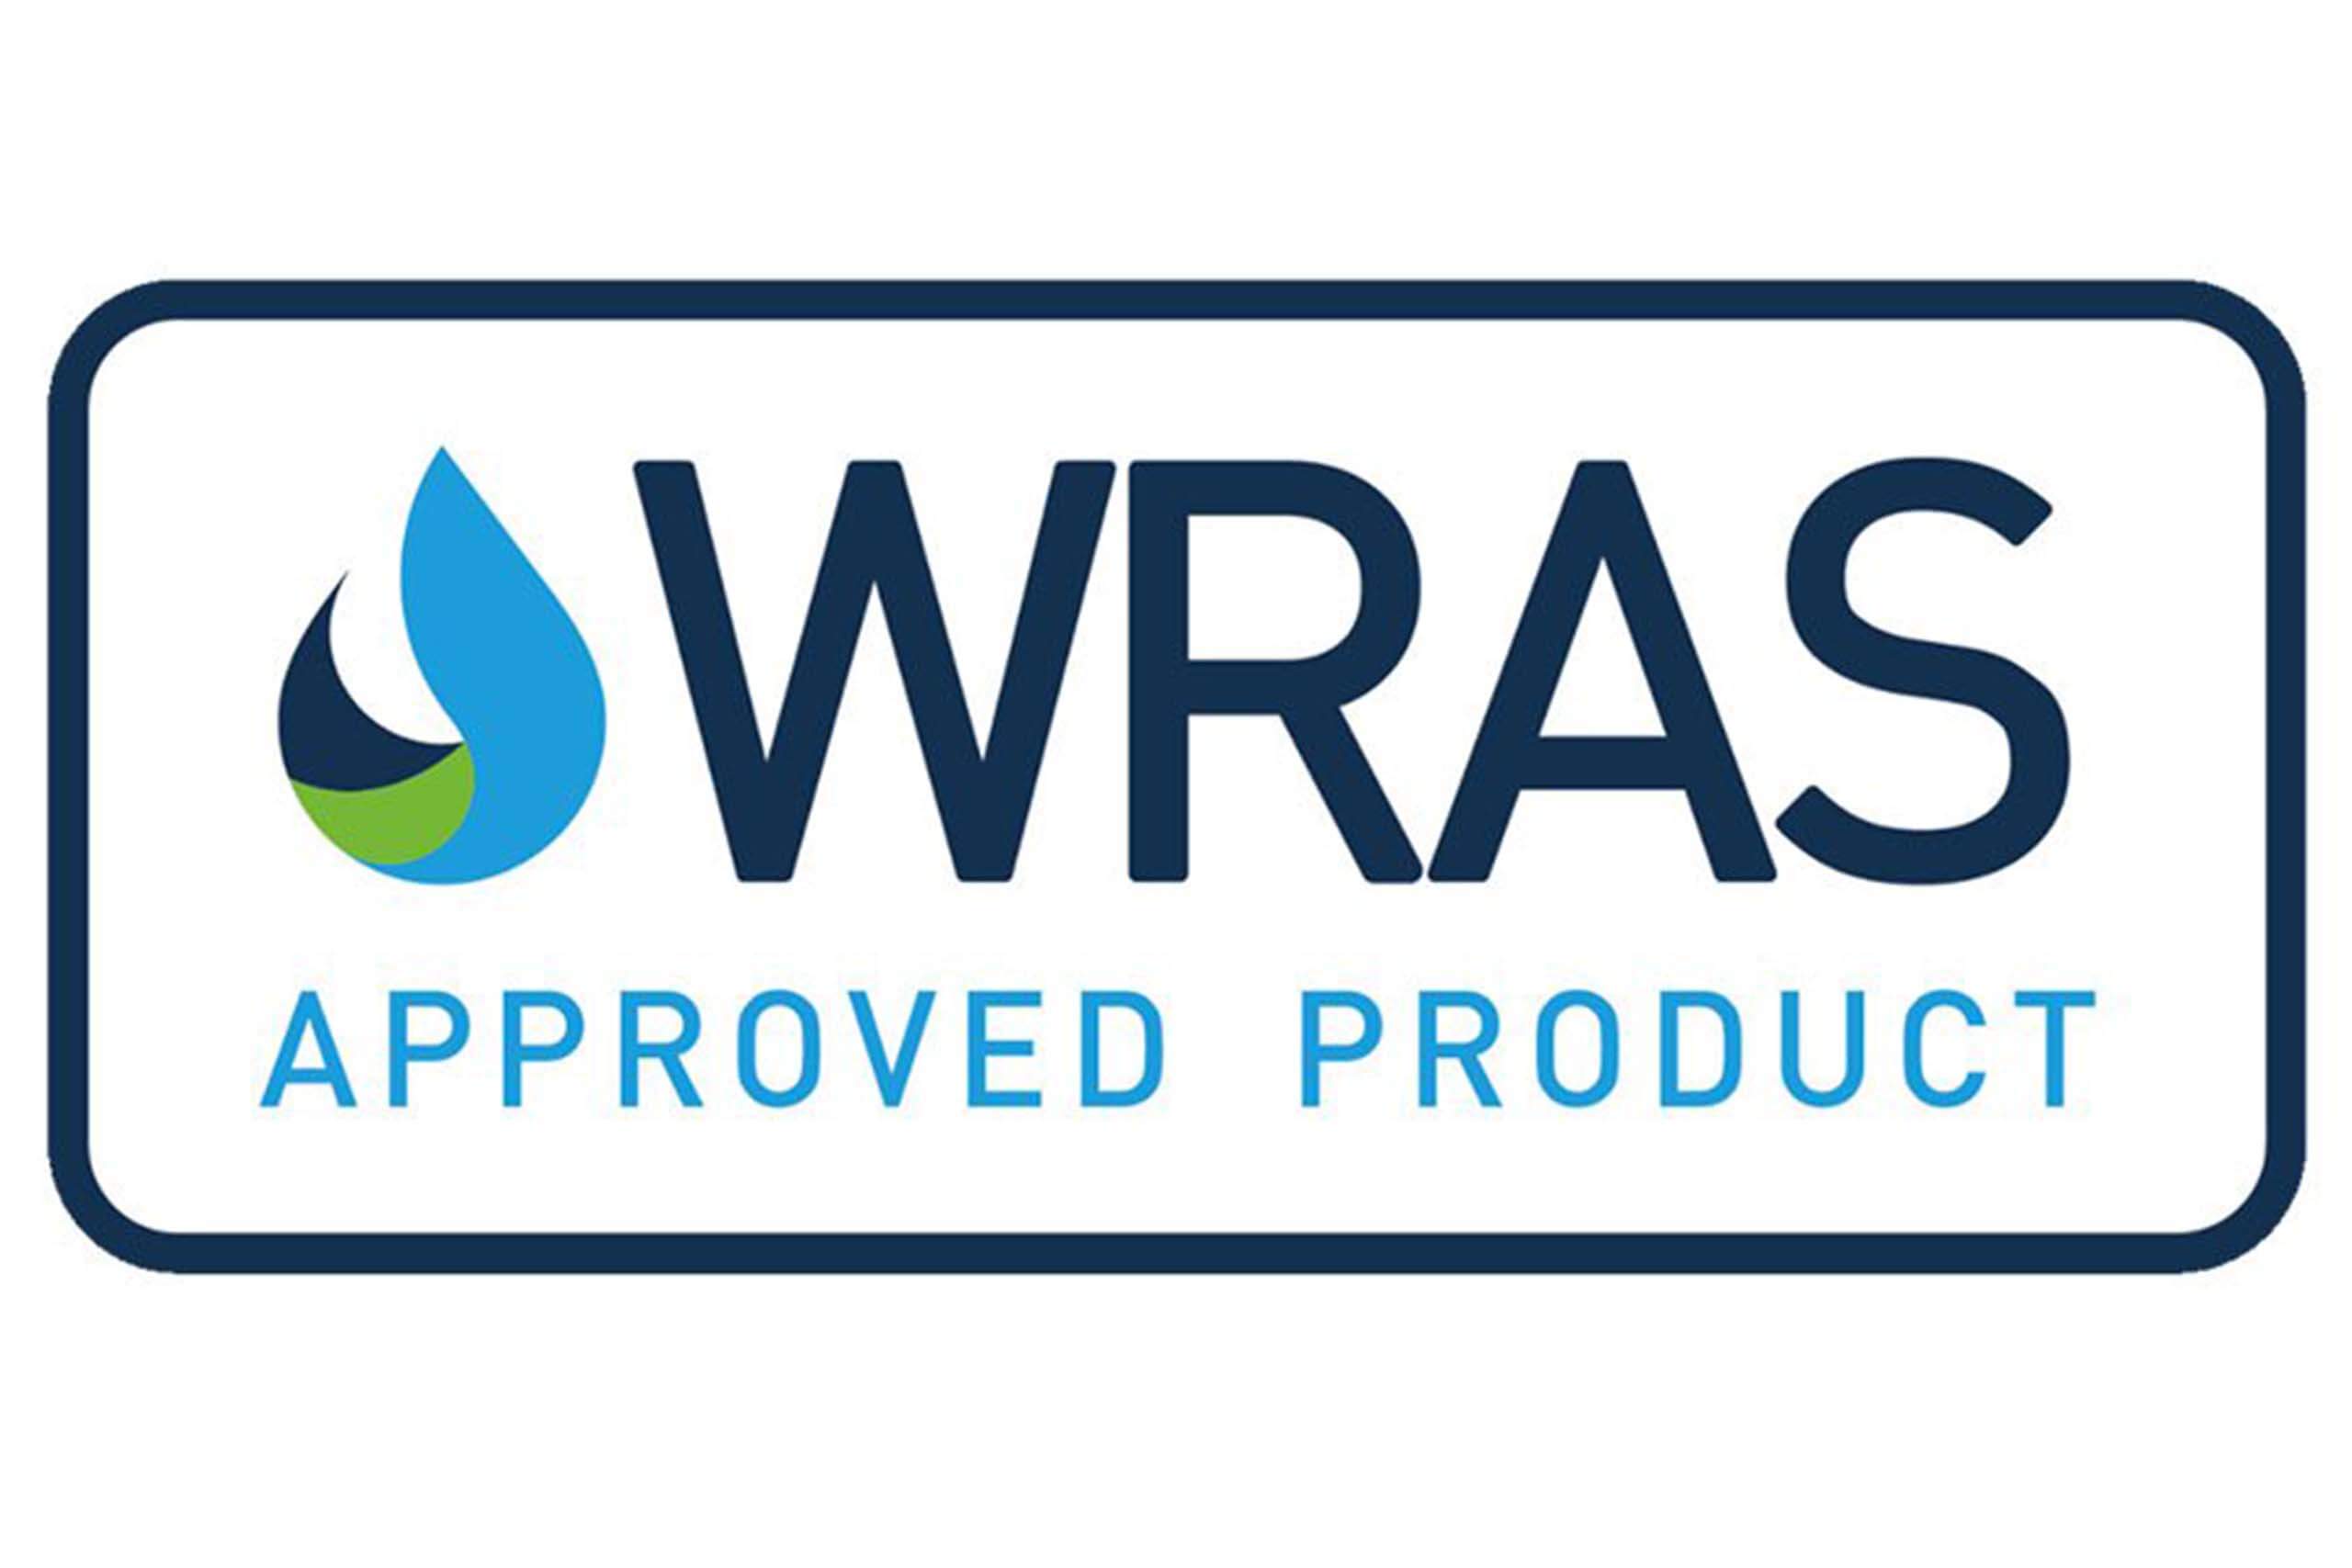 WRAS Approval: What does WRAS mean?